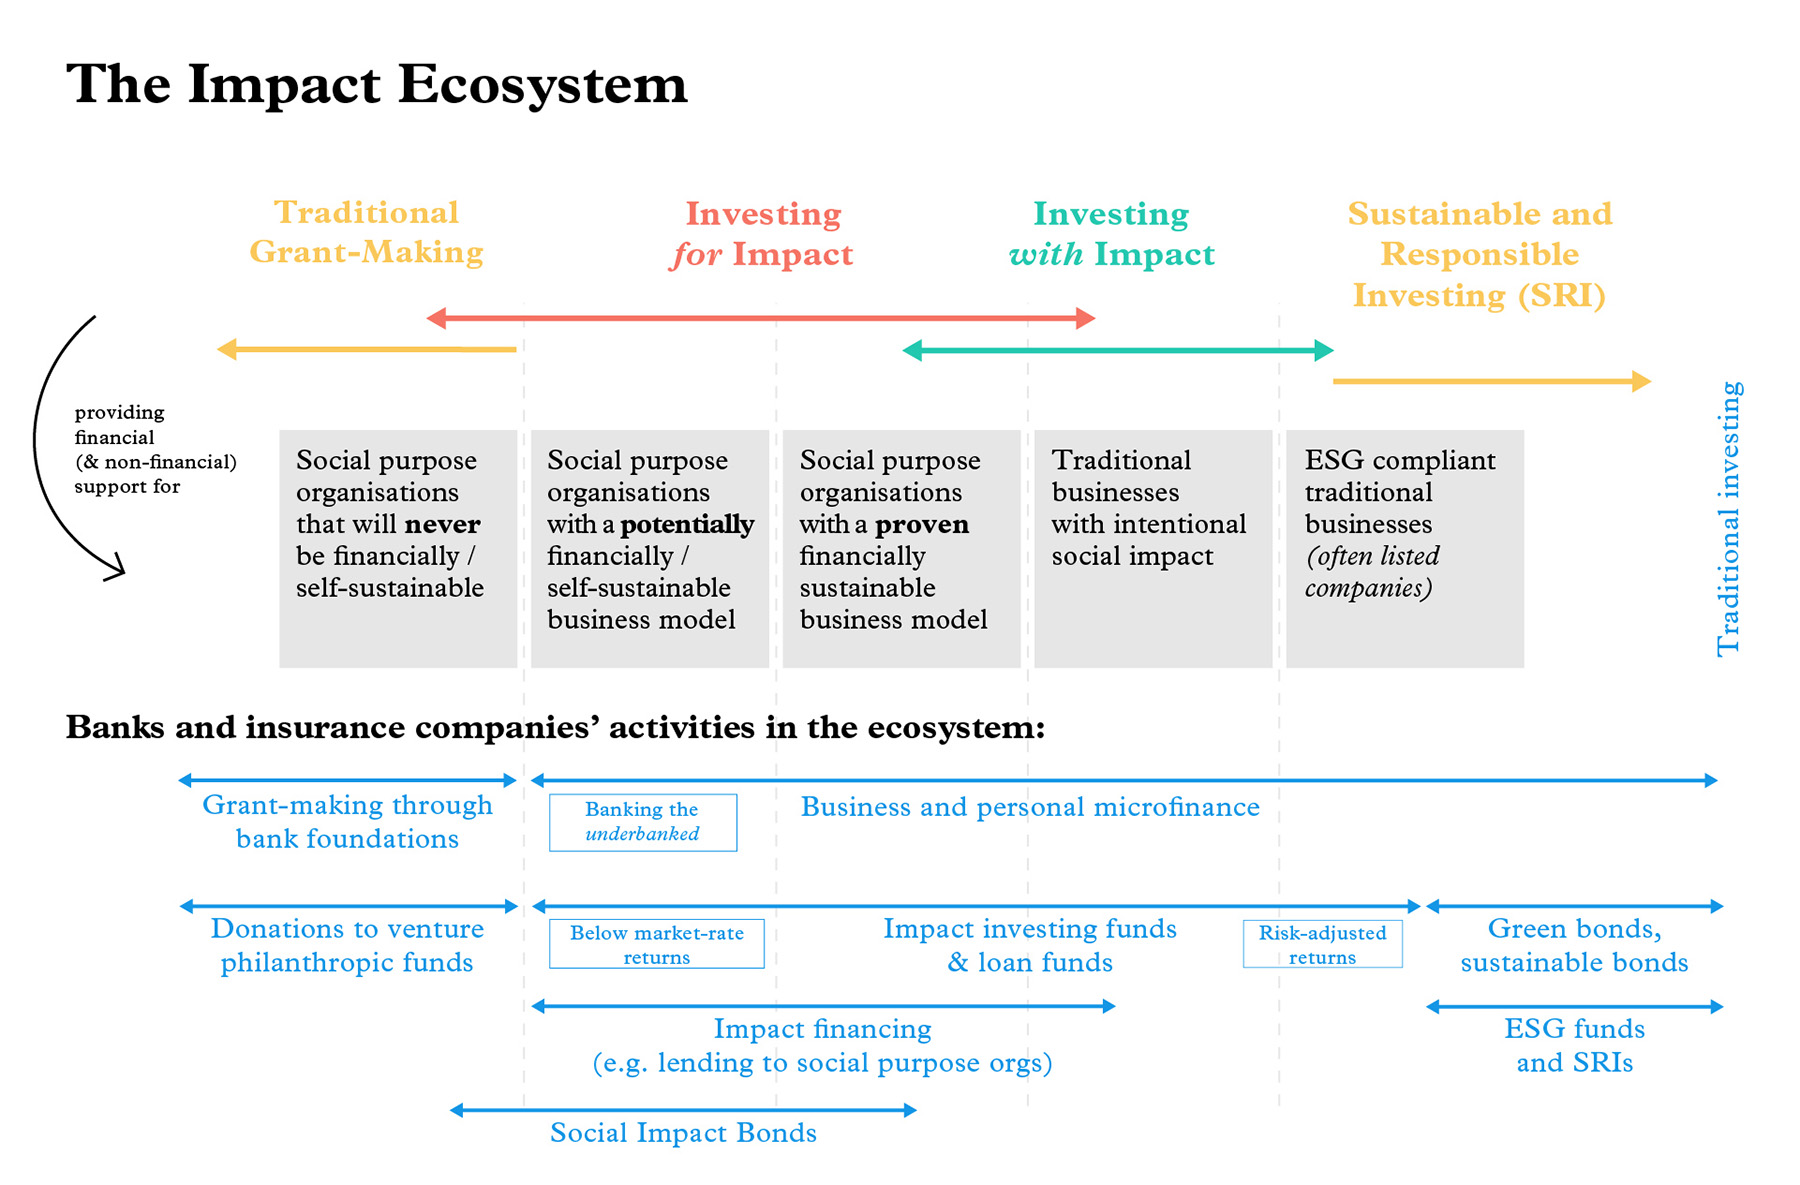 Impact ecosystem - banks and insurance companies